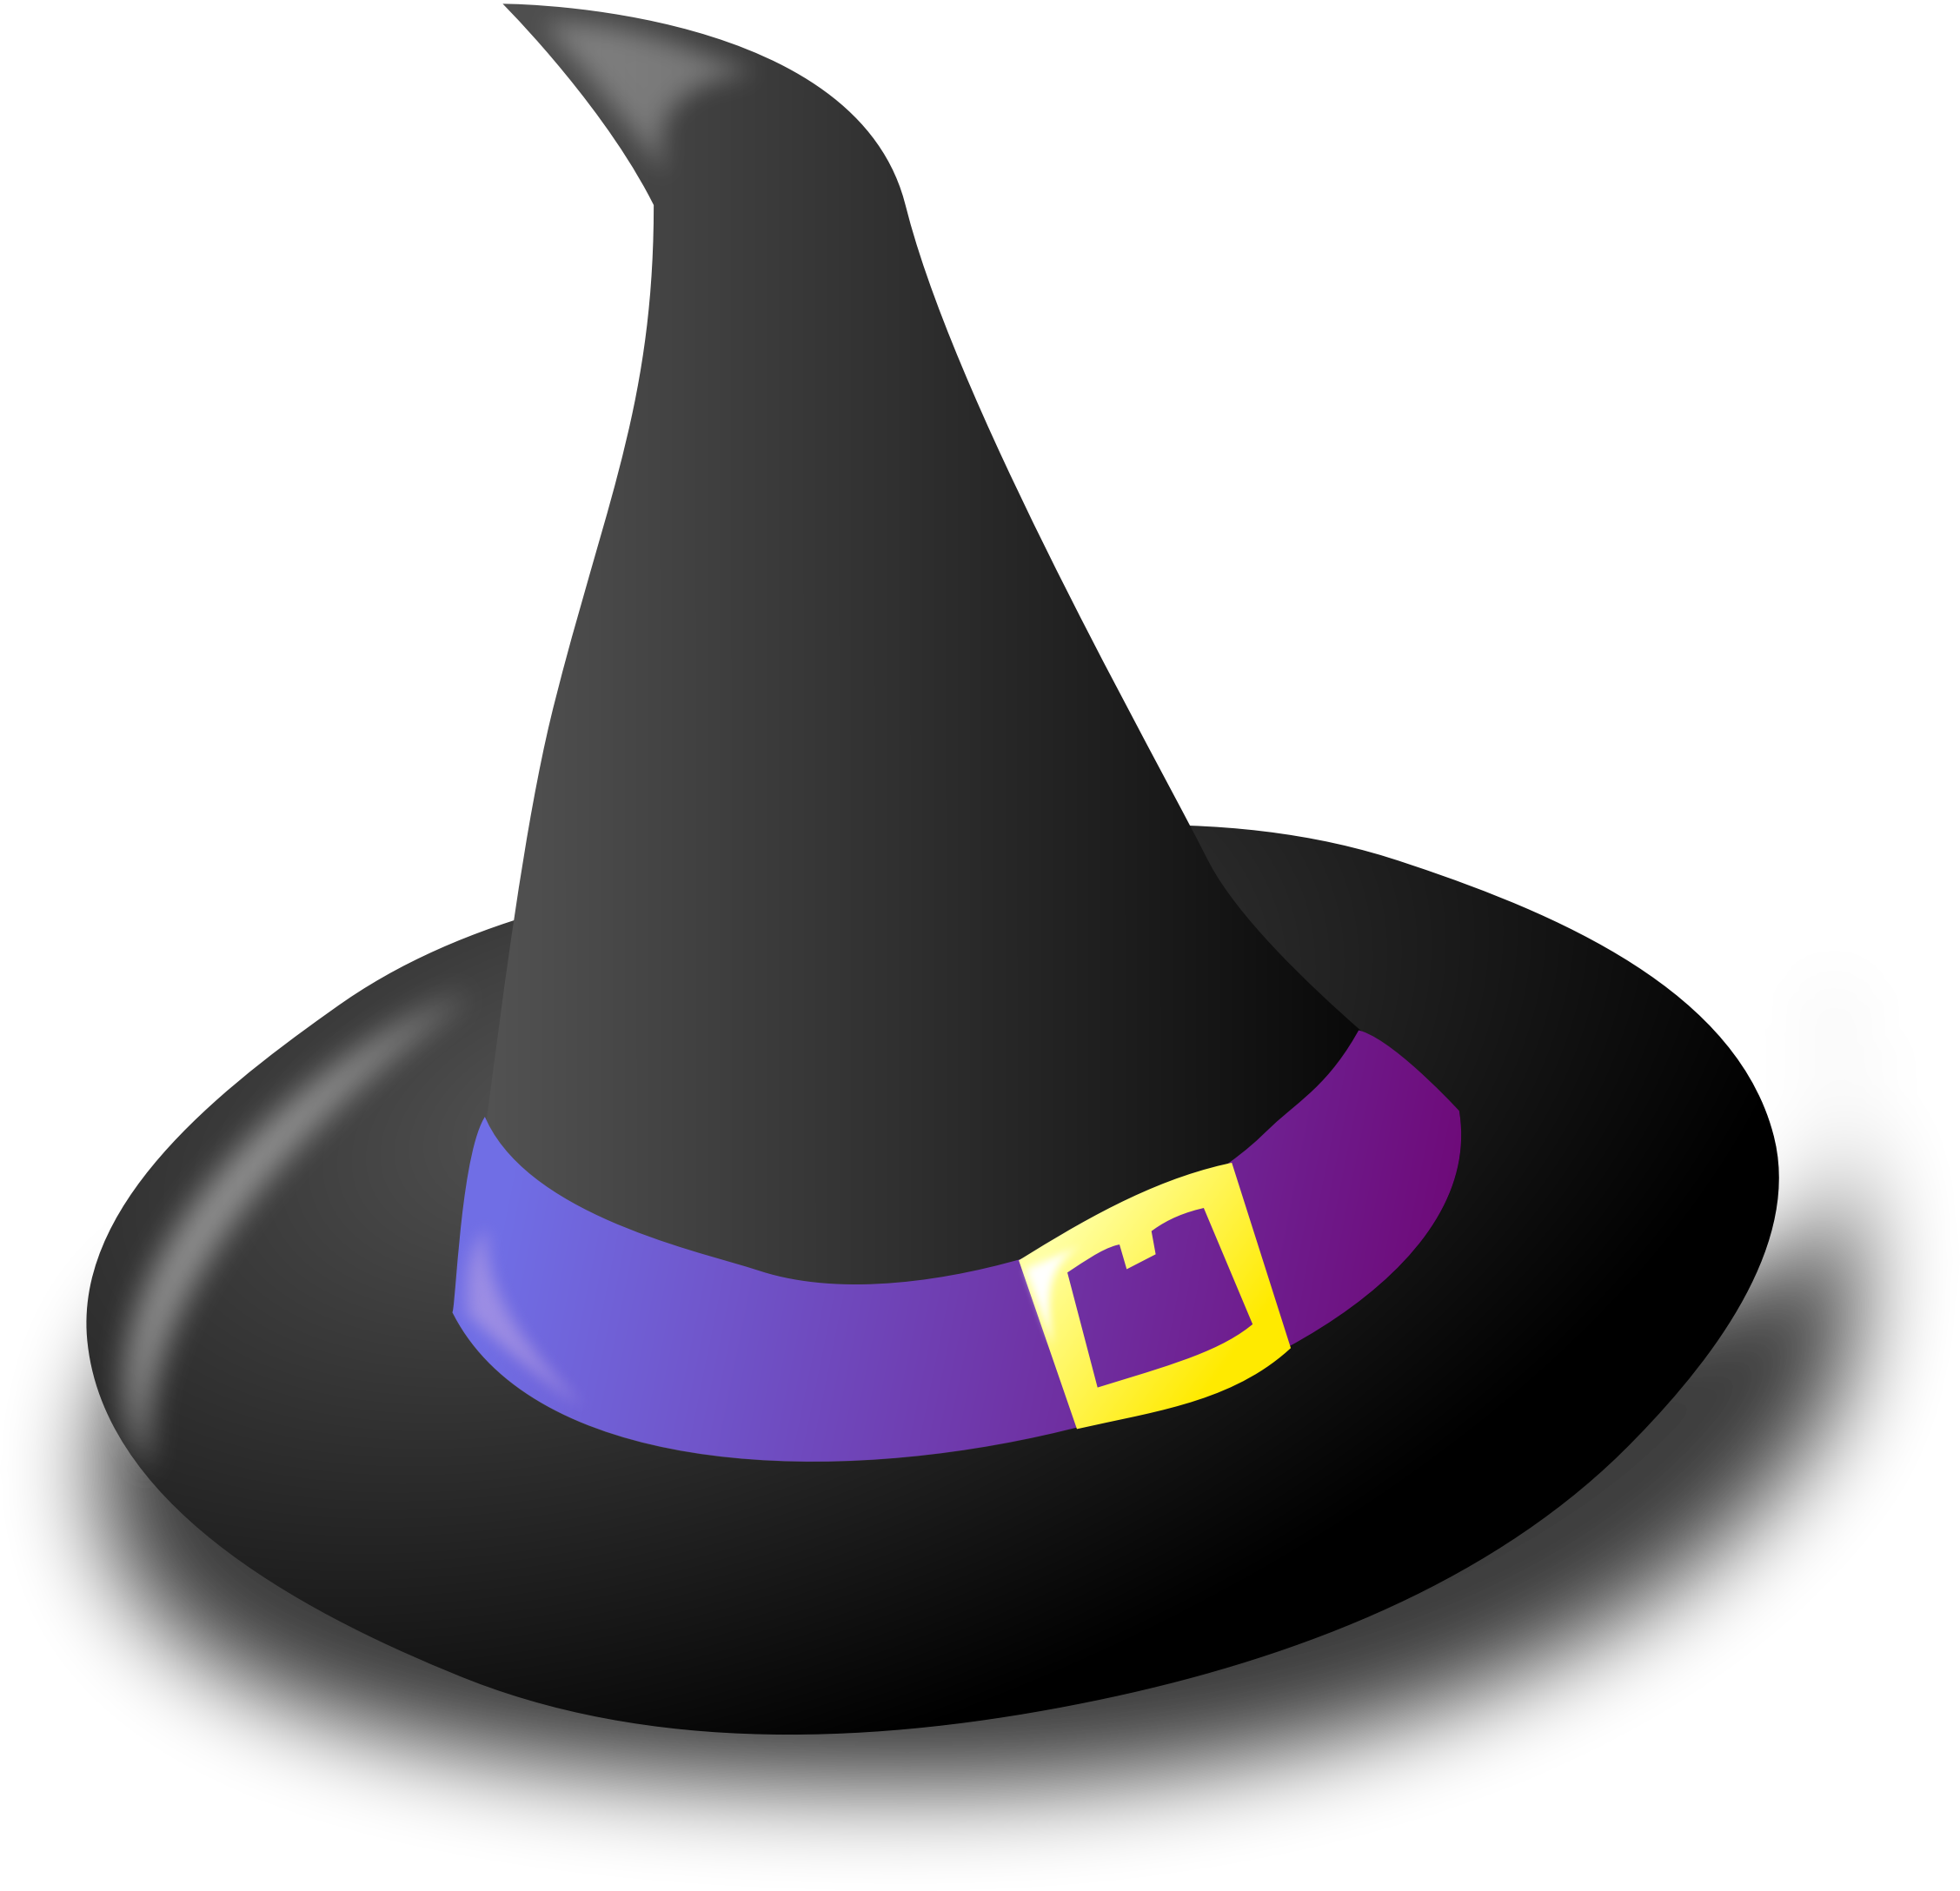 Black witch hat clipart